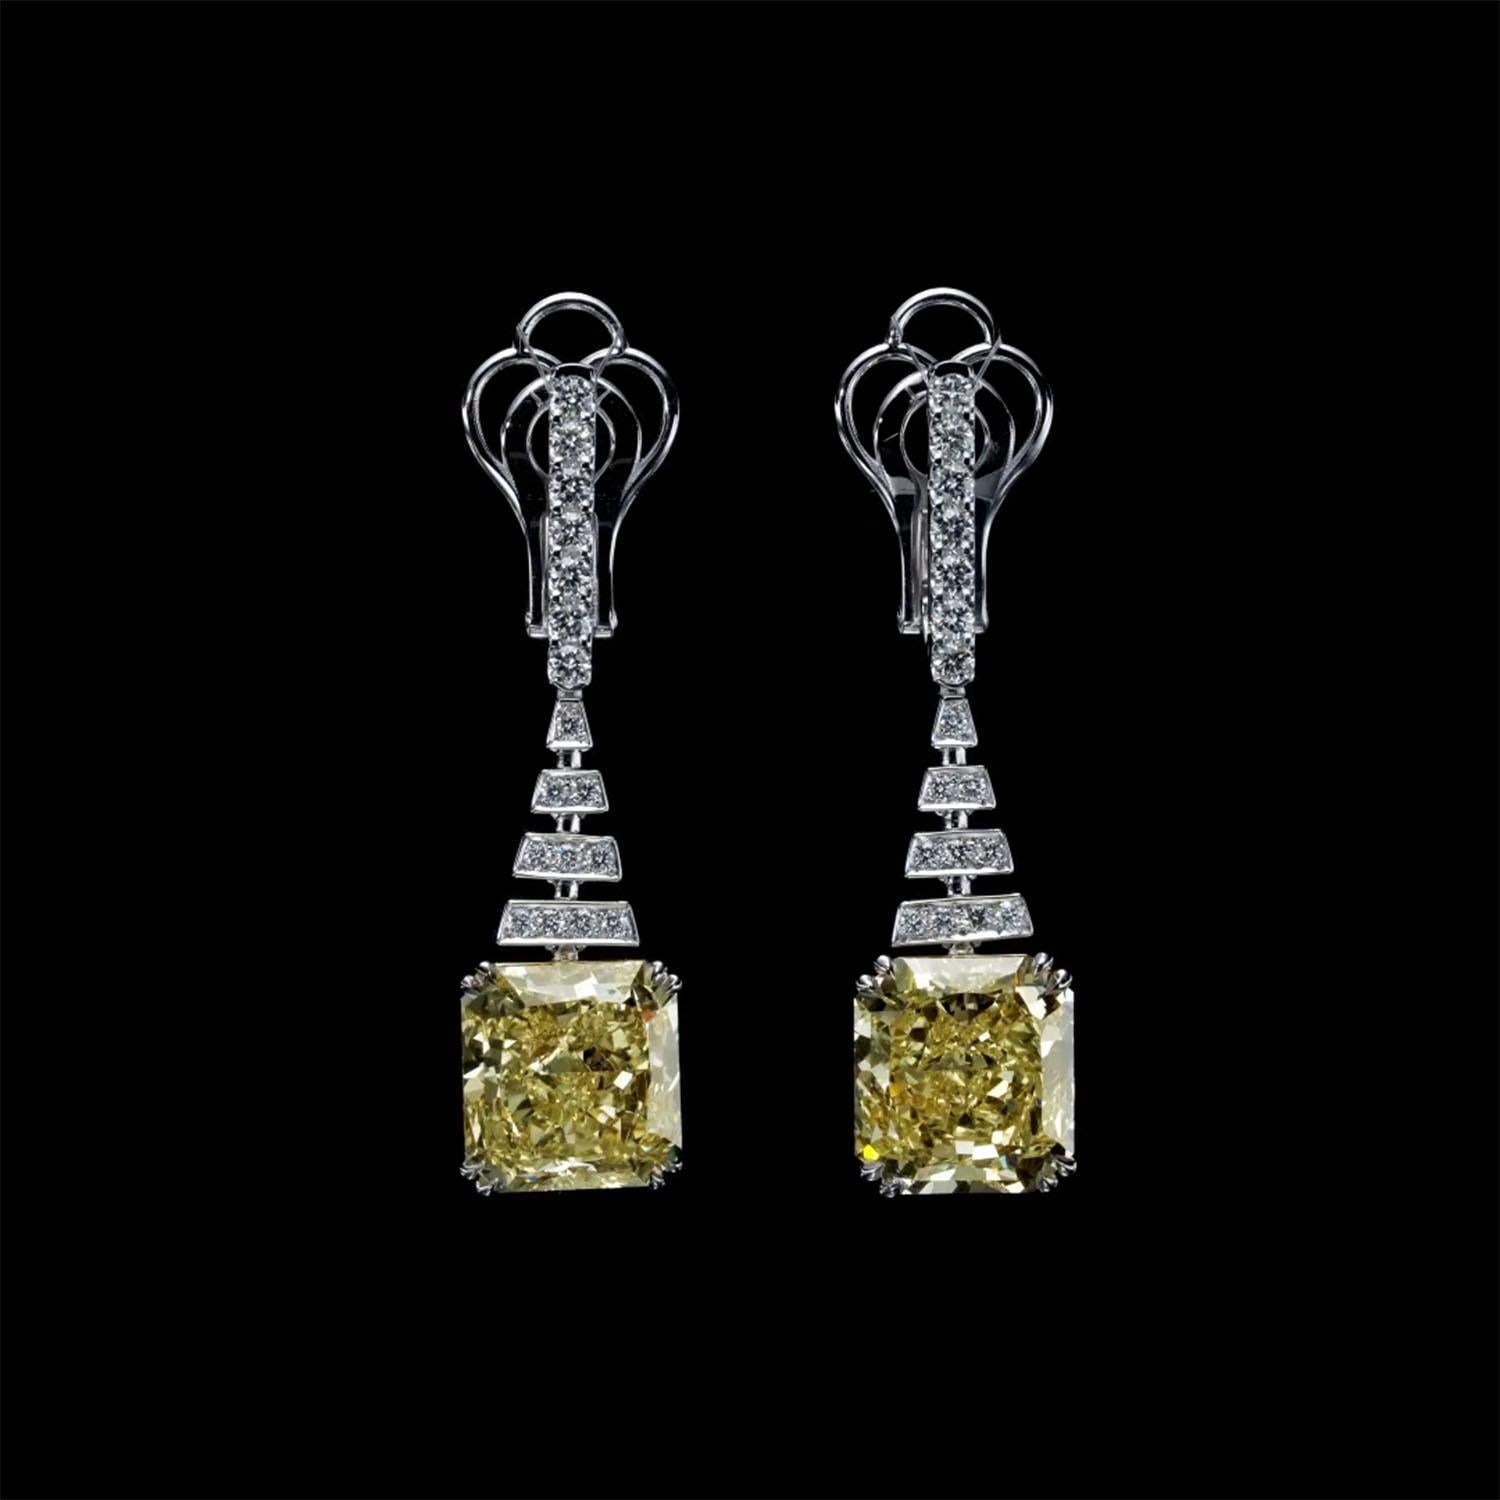 Introducing our extraordinary collection of luxury diamond earrings, meticulously crafted with impeccable design and the finest materials. Elevate your style with these enchanting drop diamond earrings, adorned with an exquisite arrangement of